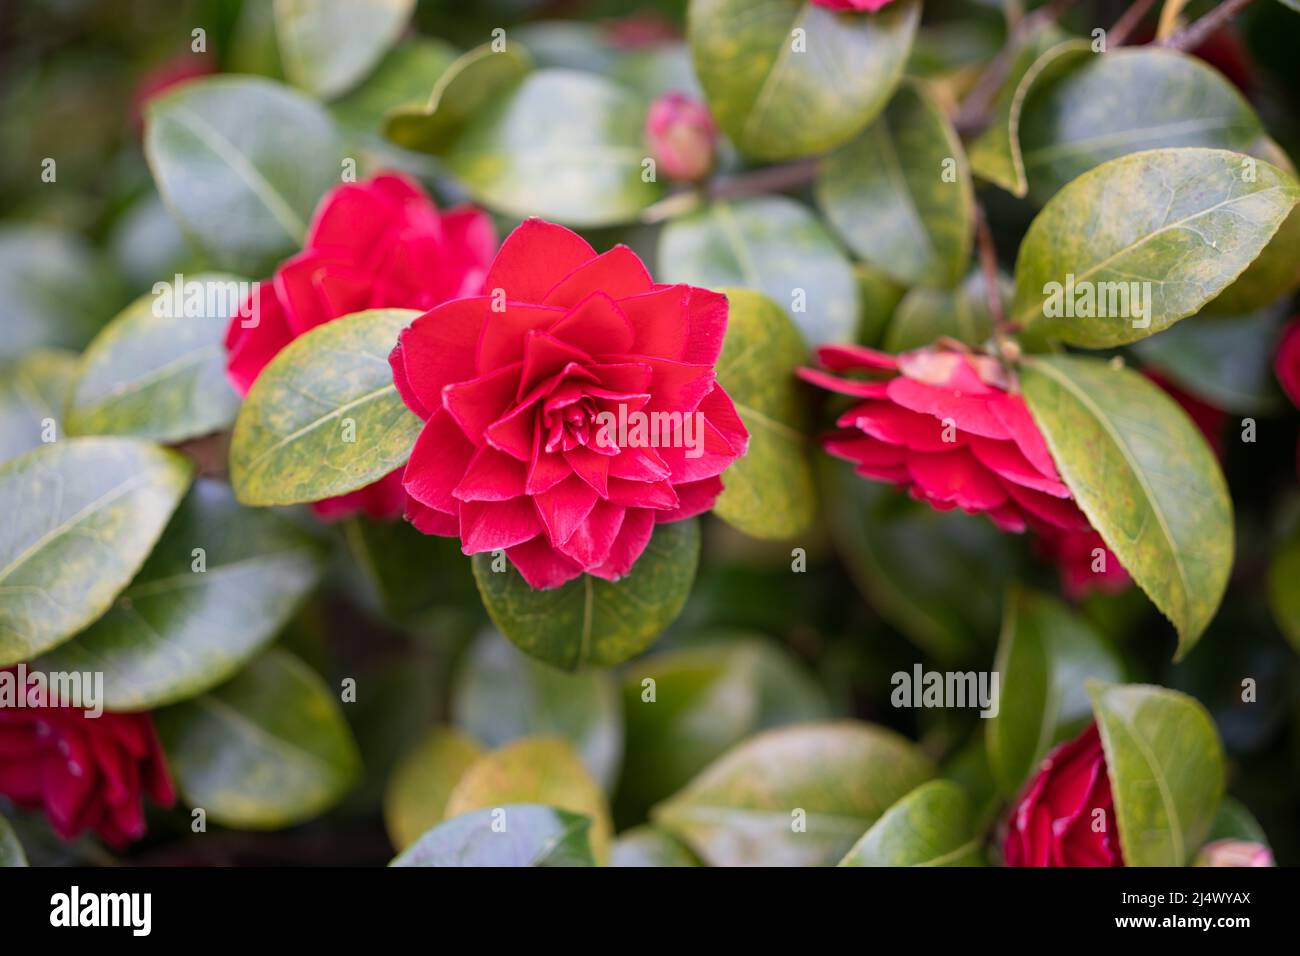 Japanese camellia (Camellia japonica) on a Spring day. Credit: Hazel Plater/Alamy Stock Photo